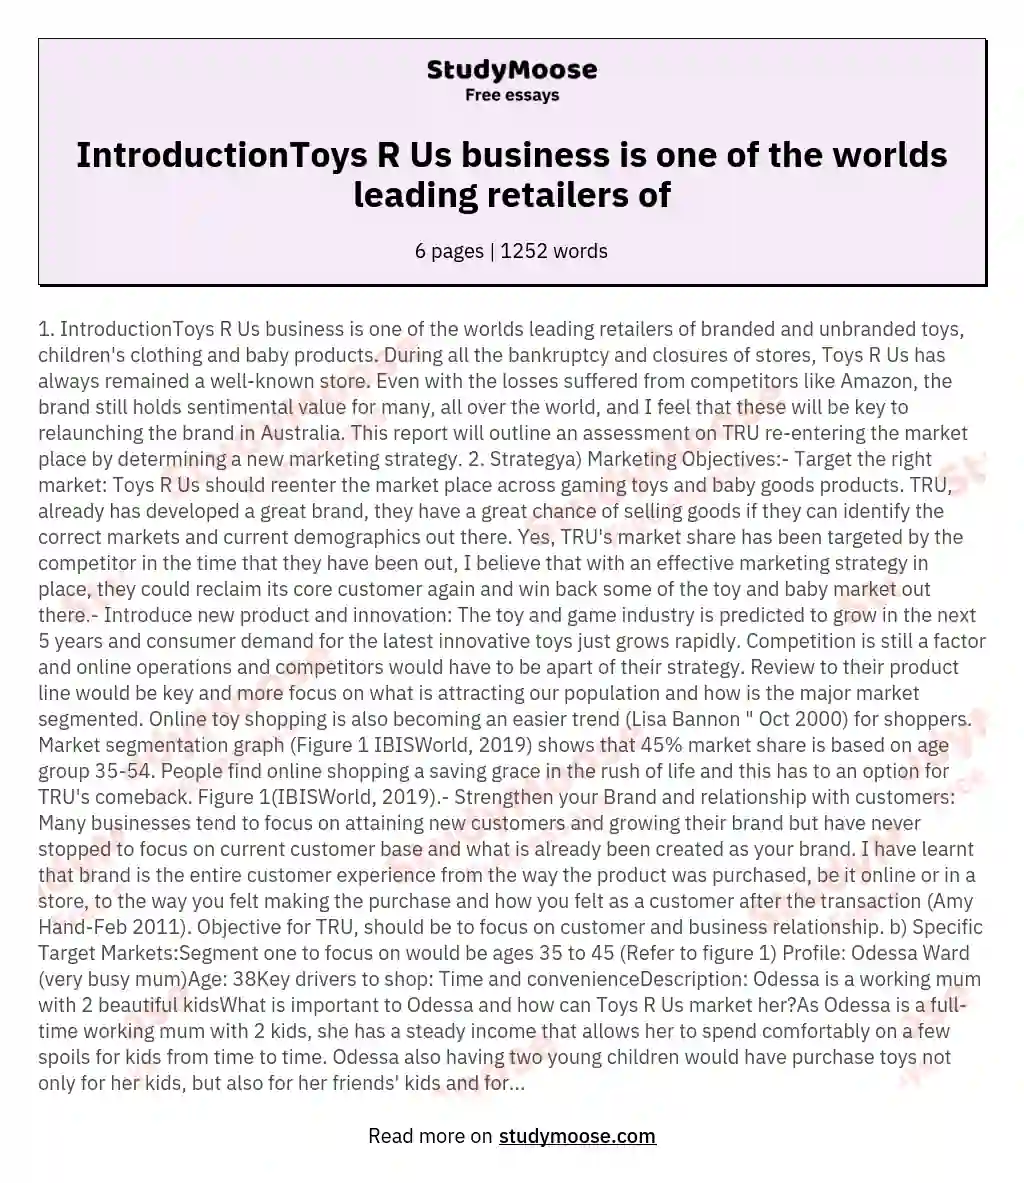 IntroductionToys R Us business is one of the worlds leading retailers of